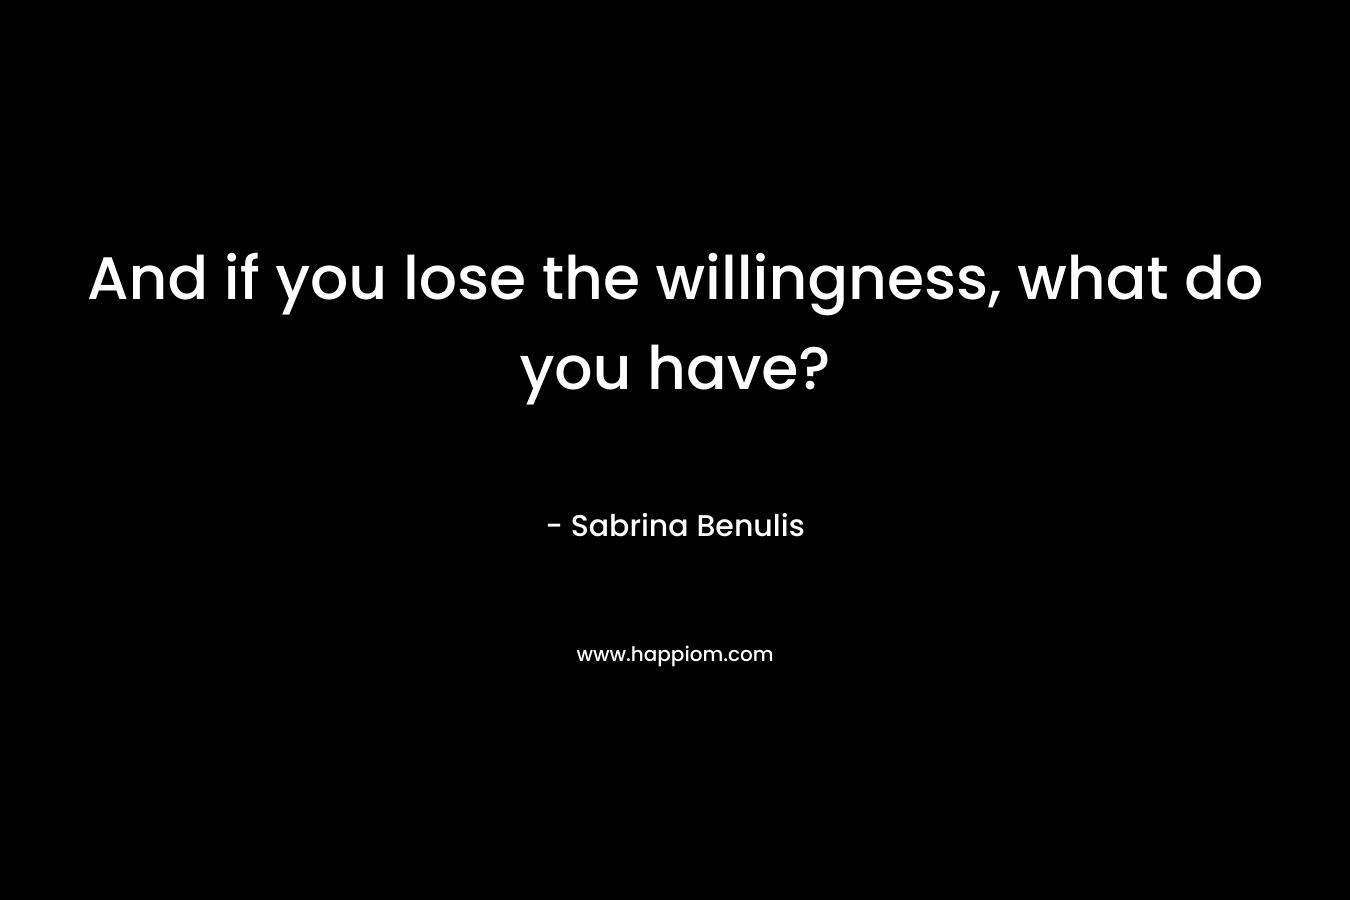 And if you lose the willingness, what do you have?